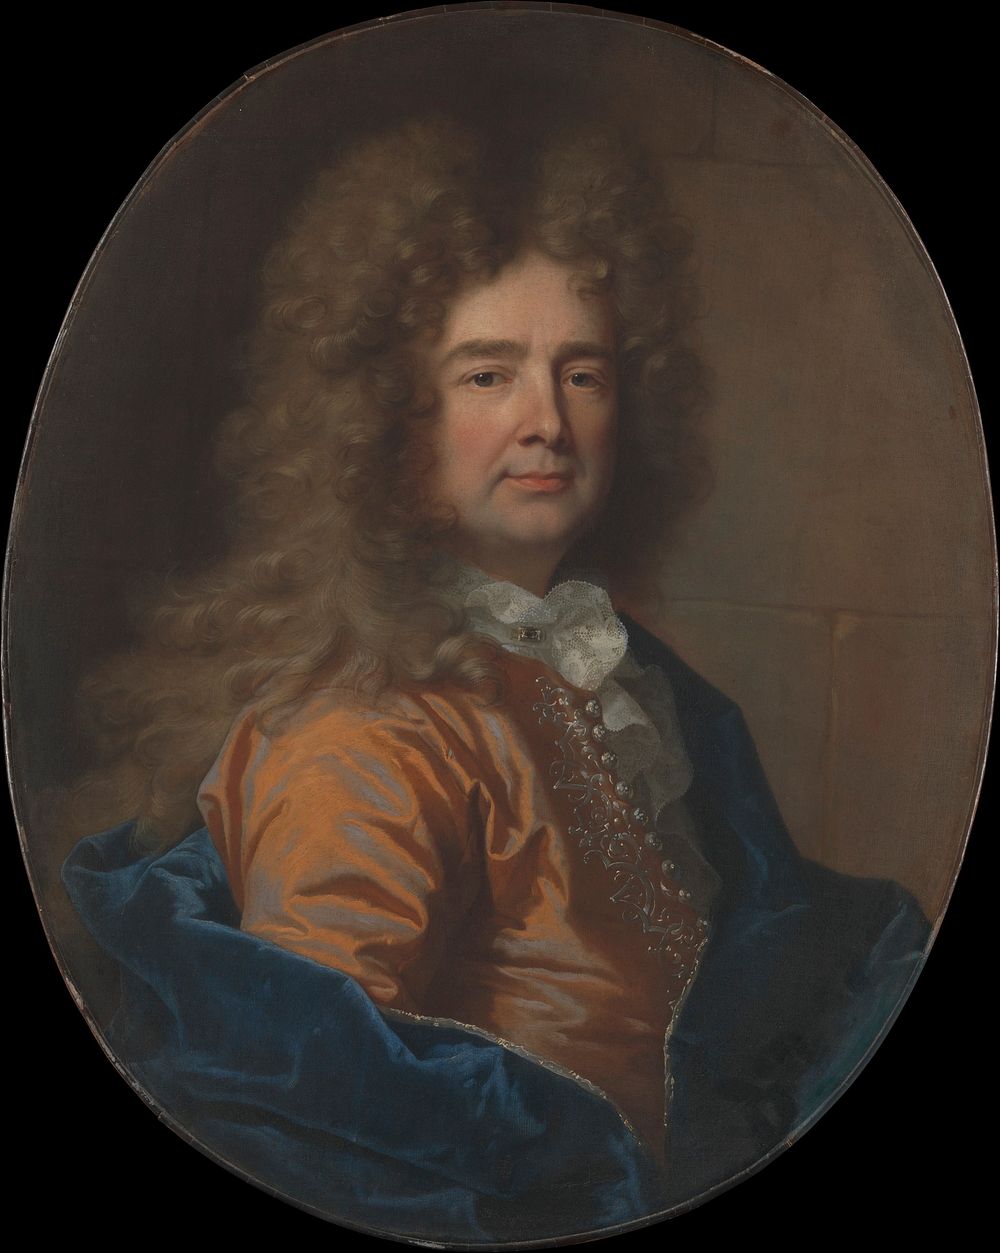 Portrait of a Man by Hyacinthe Rigaud